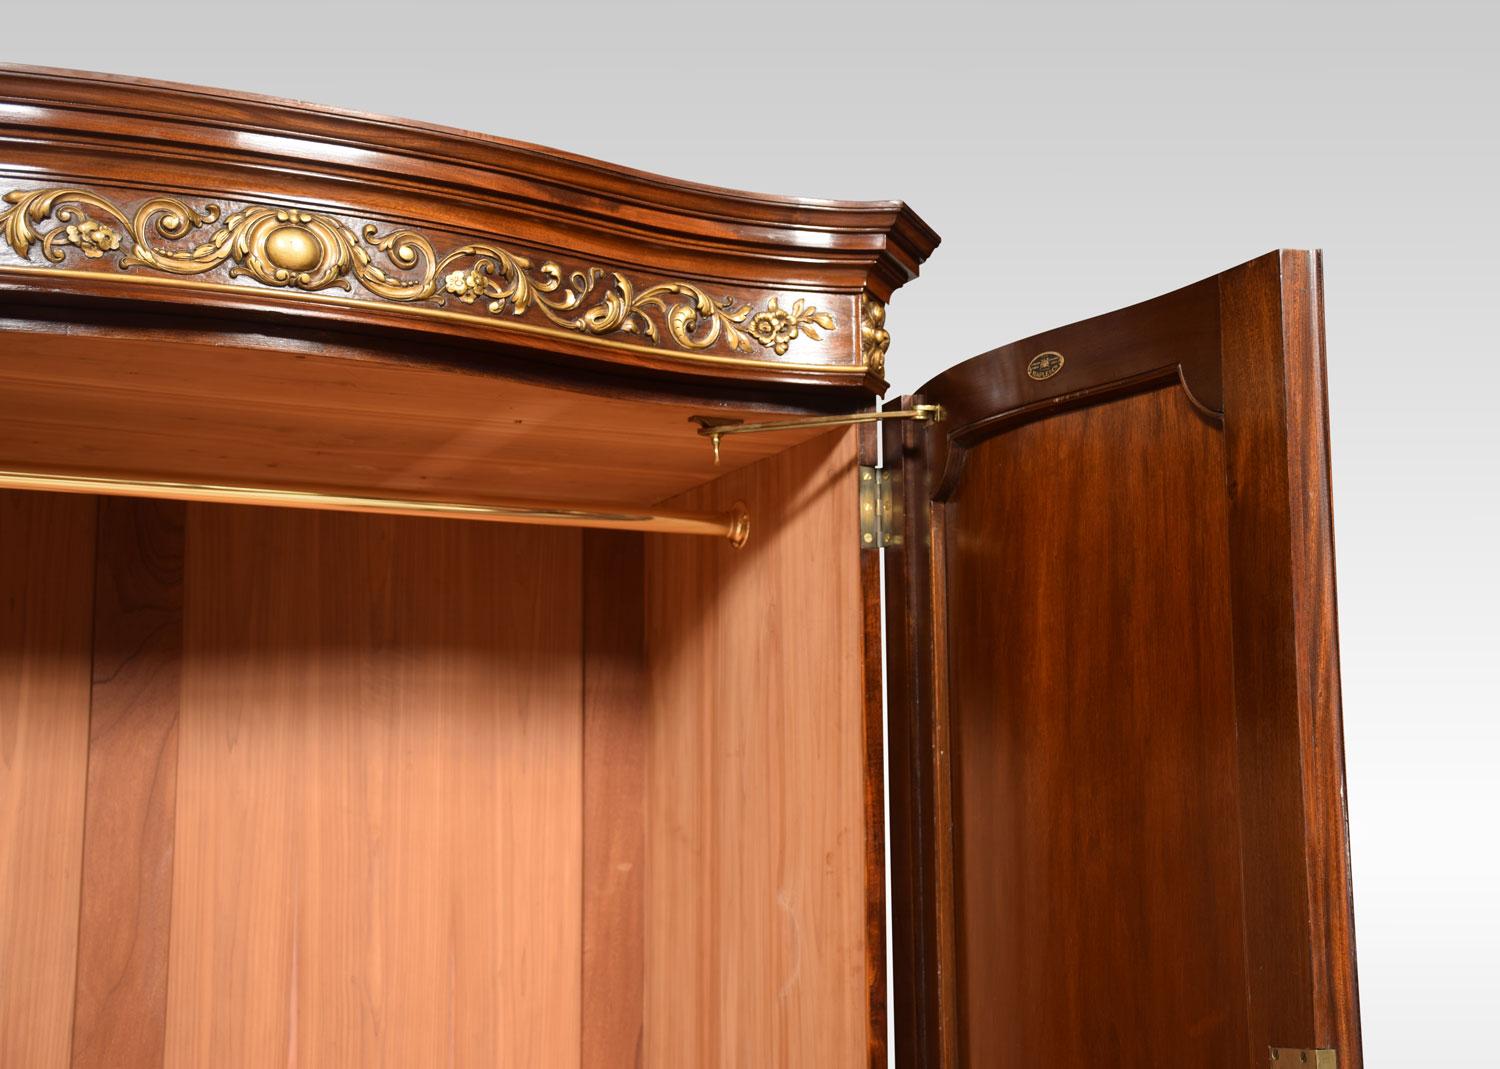 19th Century Serpentine Fronted Maple and Co. Walnut Wardrobe